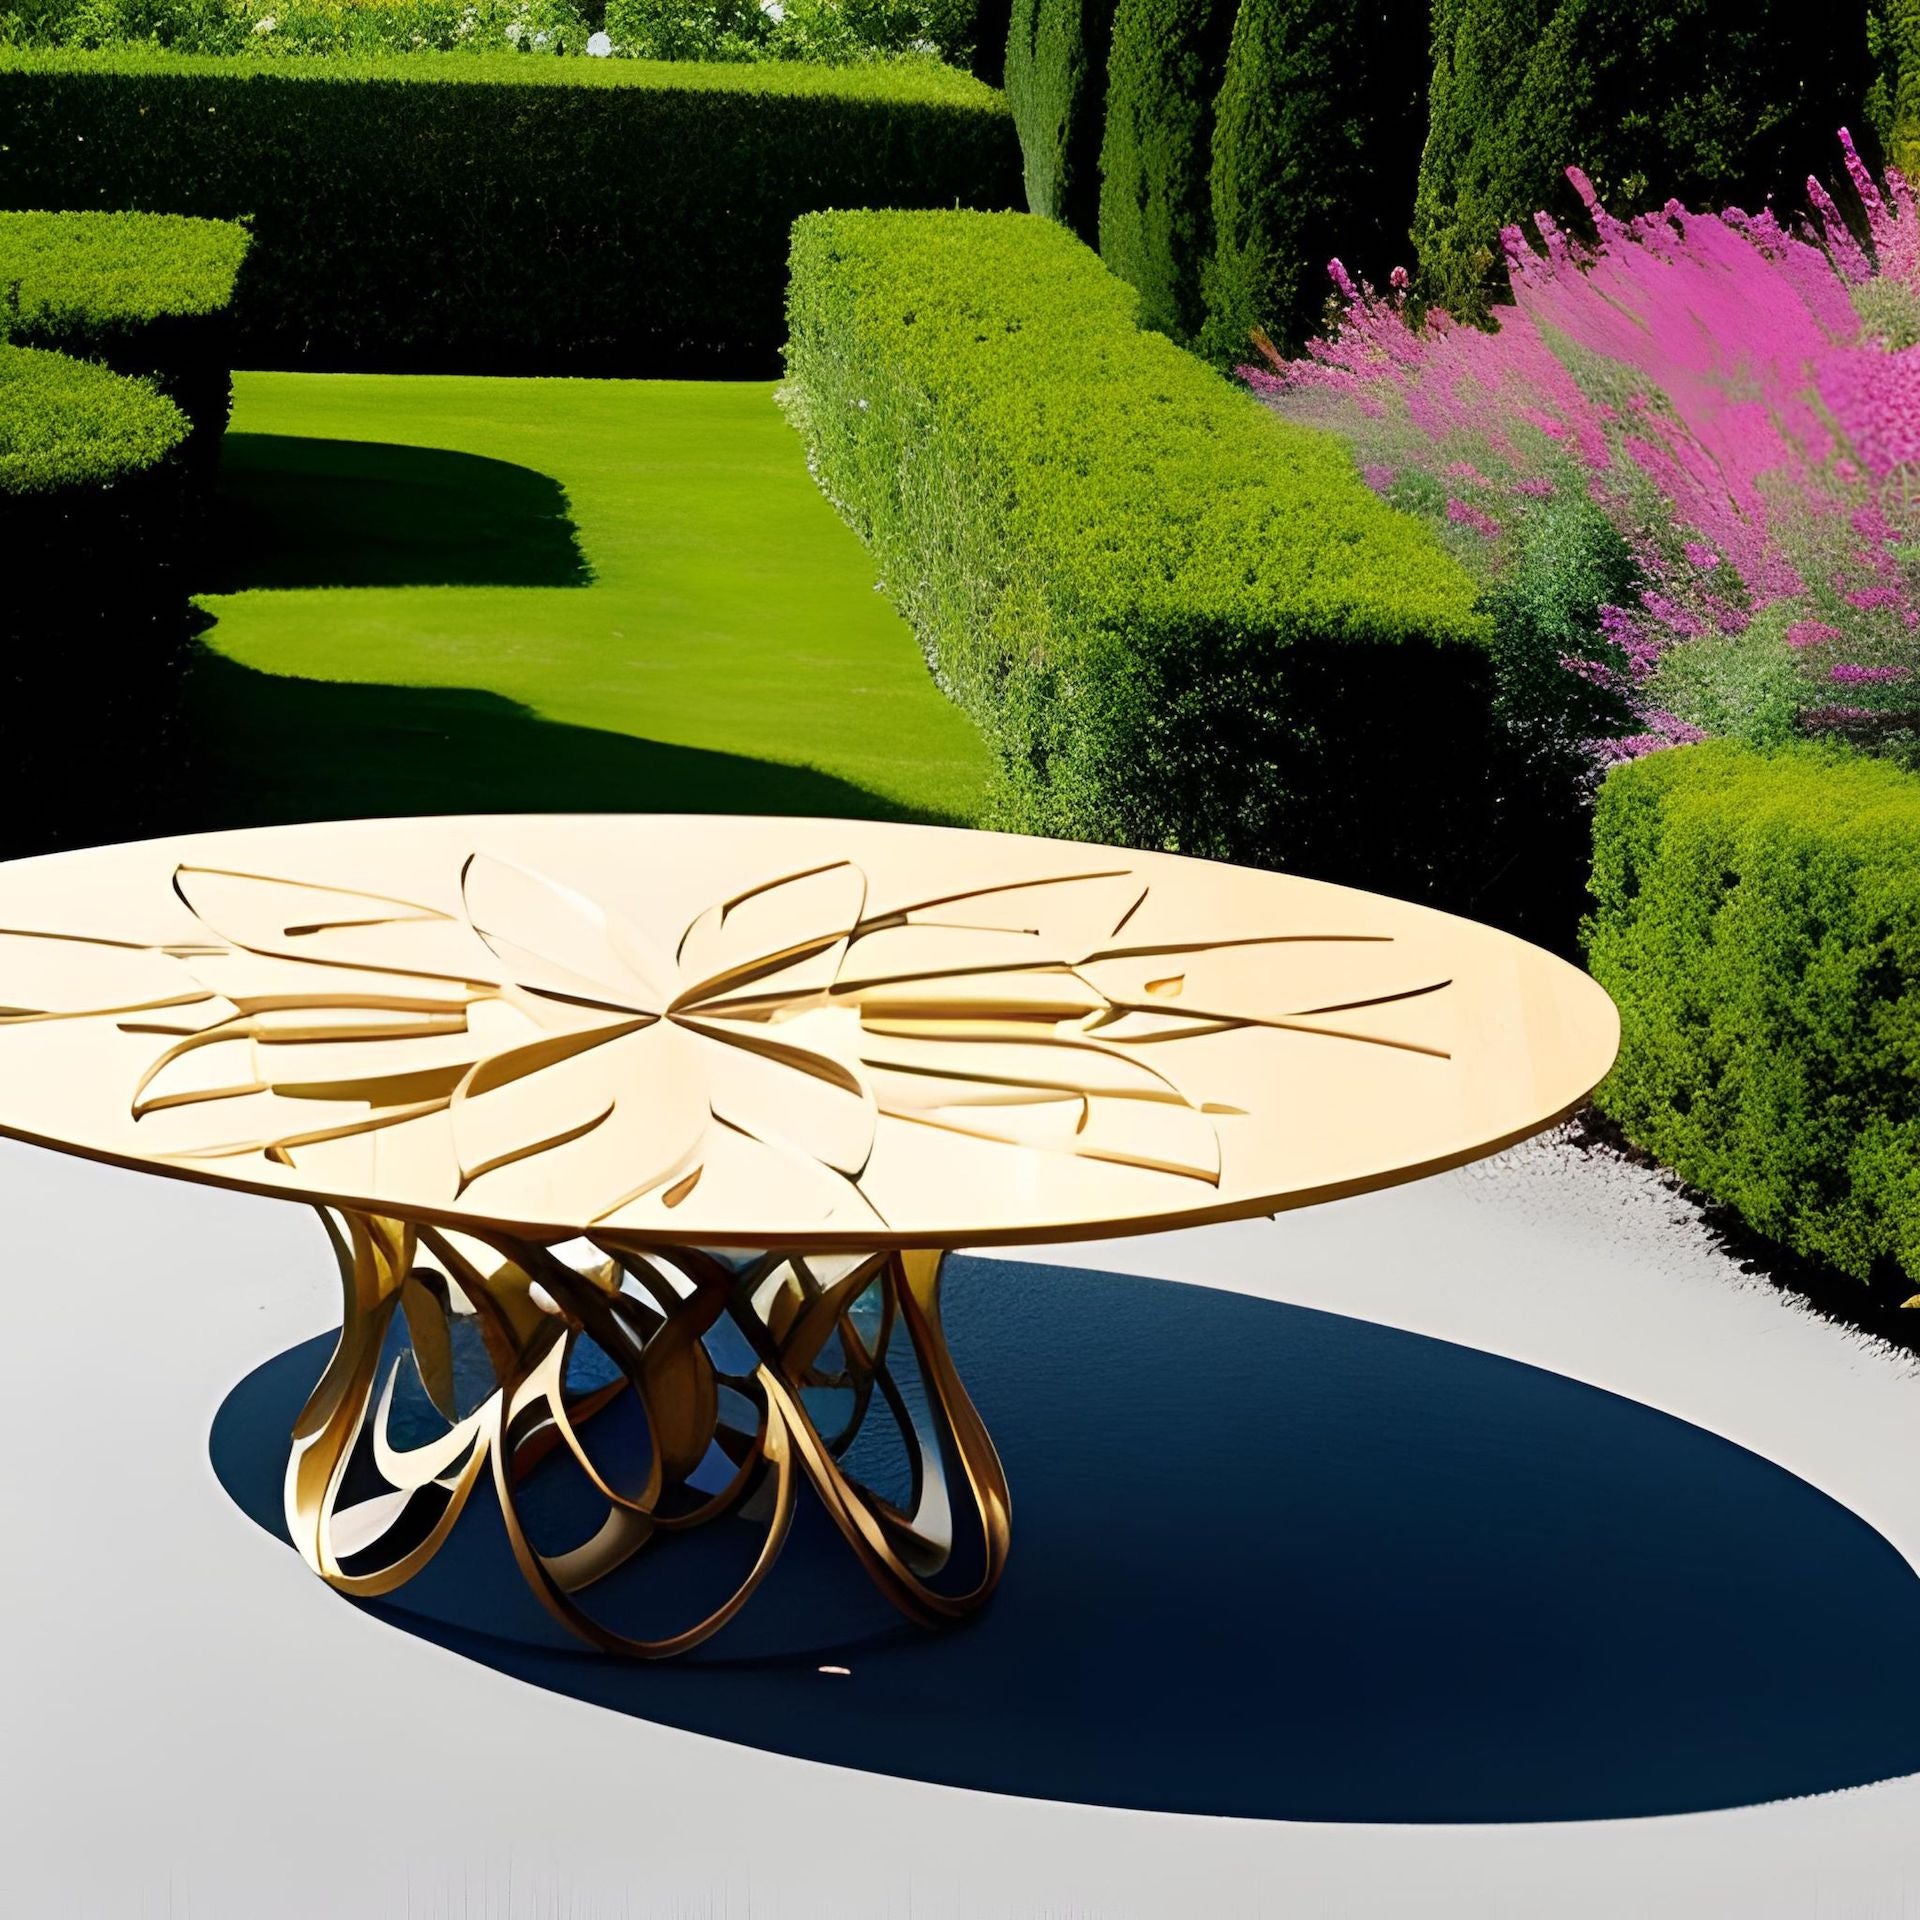 AI-generated image from prompt: "Arabesque Table by Carlo Mollino in a garden." Via Canva